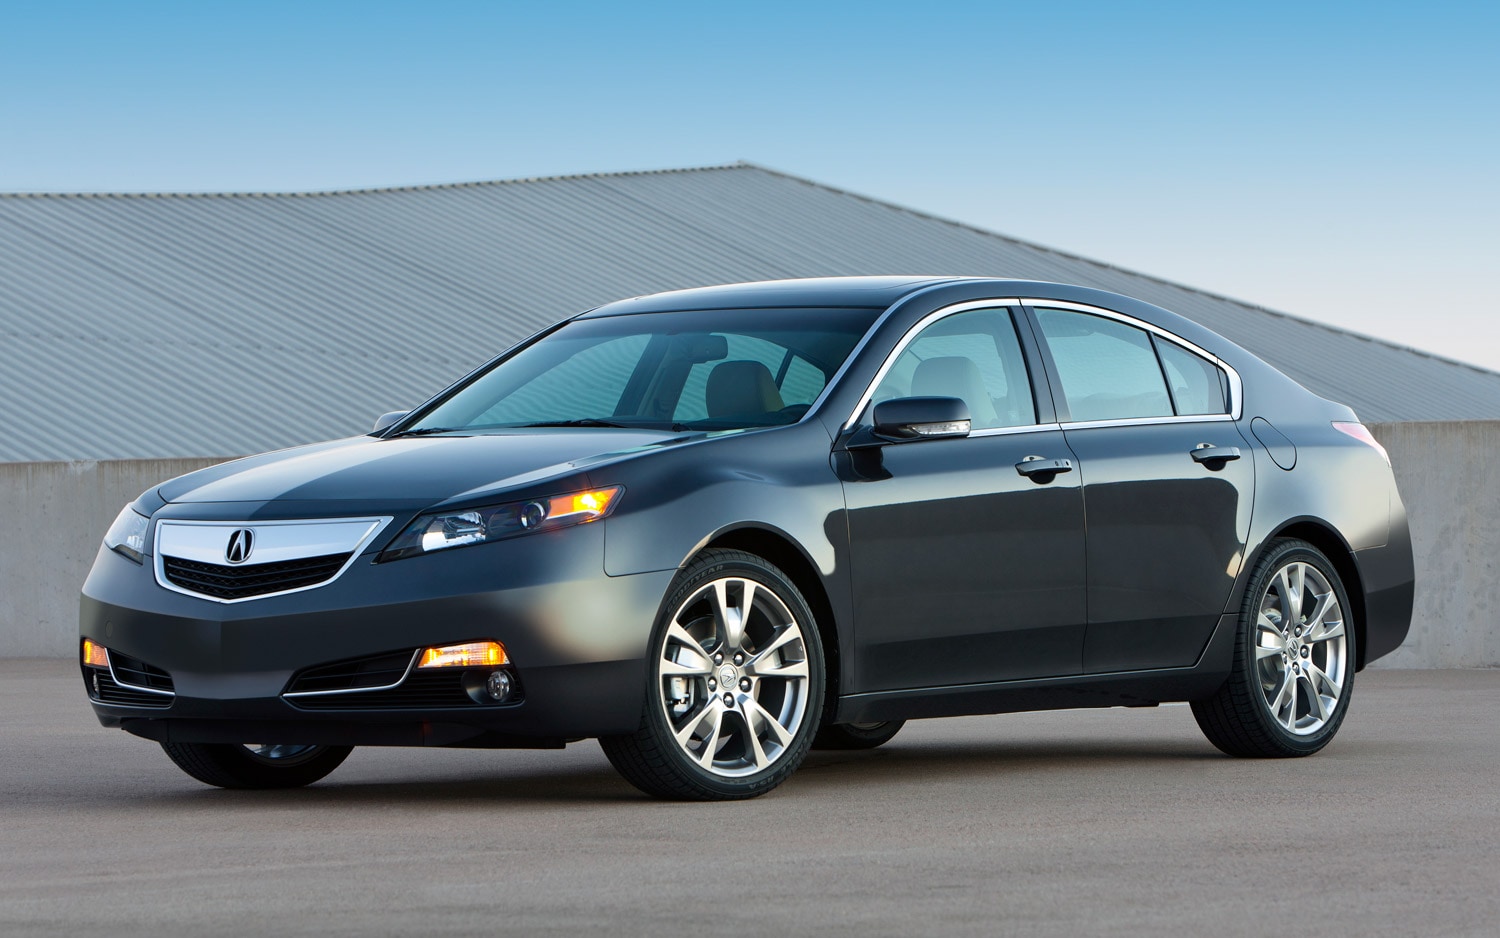 2013 Acura TL Priced at $36,800, AWD TL with Six-Speed Manual at $44,080